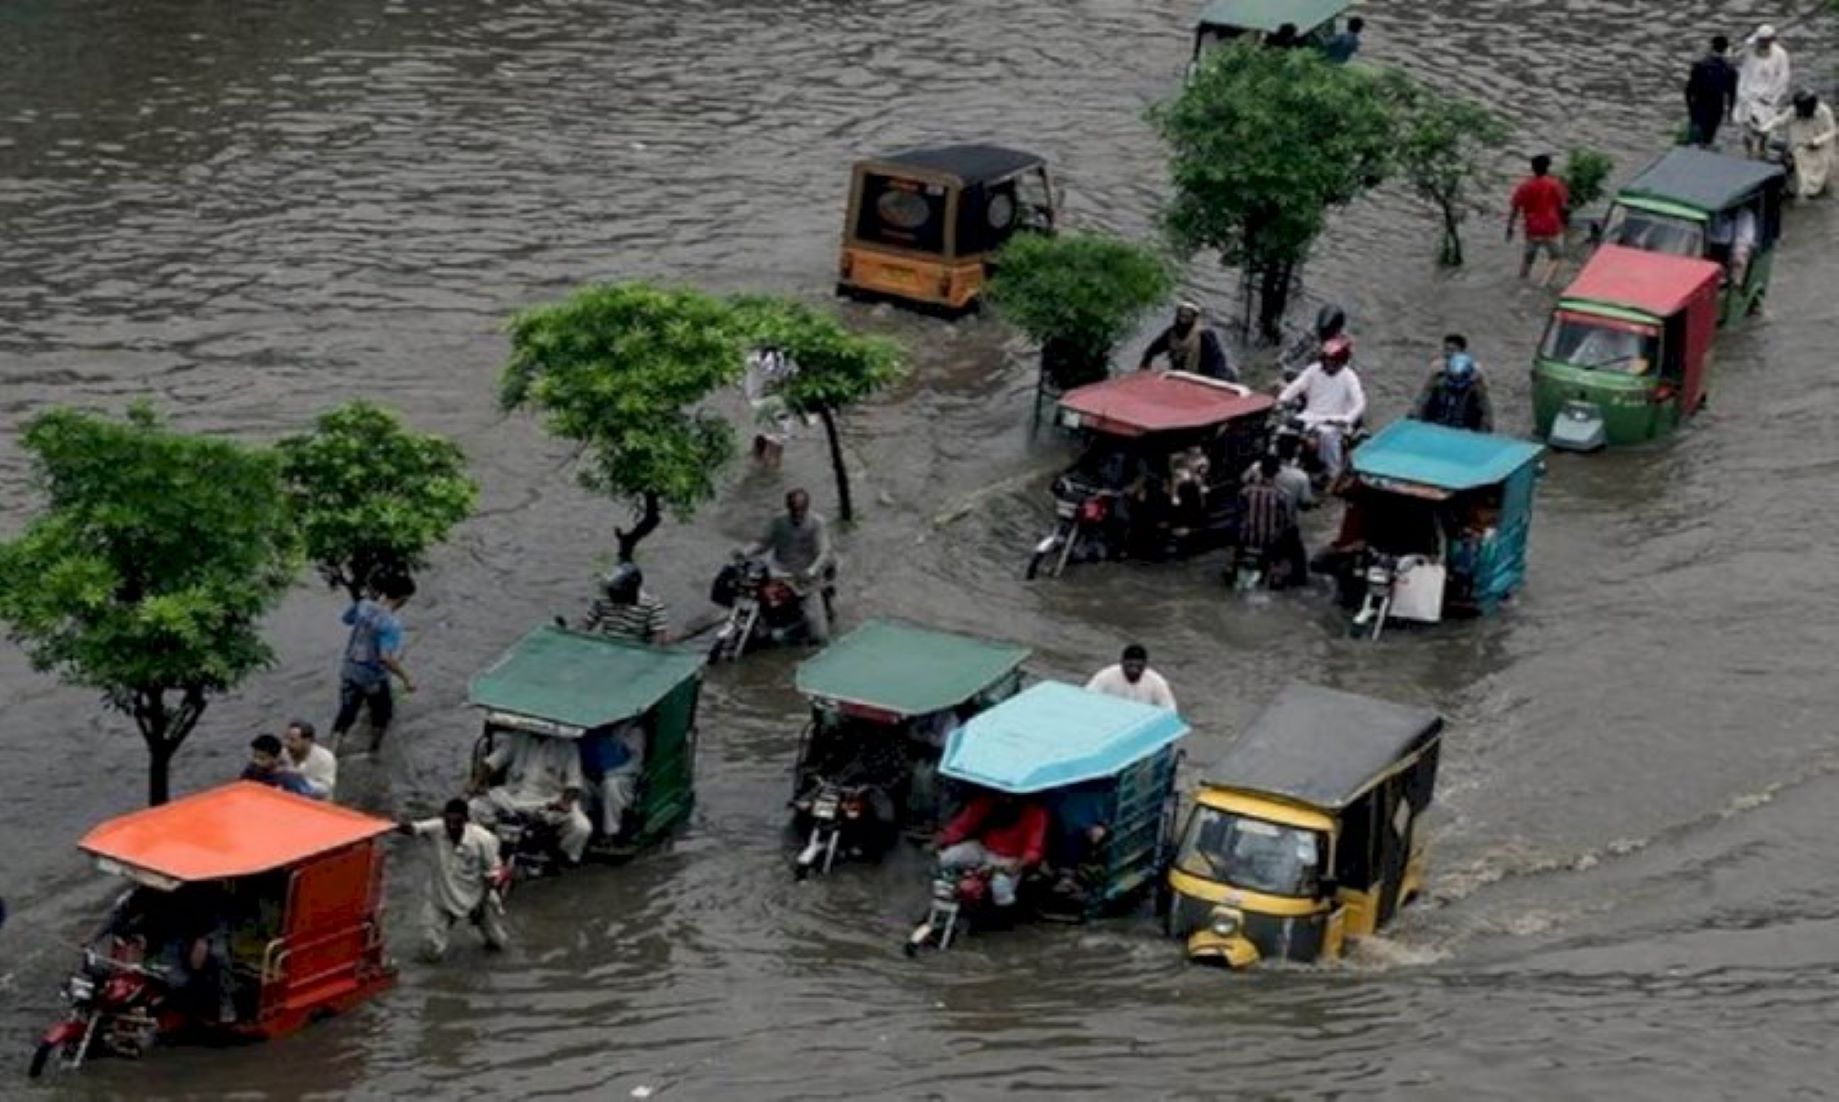 282 Killed, Over 200 Injured As Heavy Rains Continue To Wreak Havoc In Pakistan